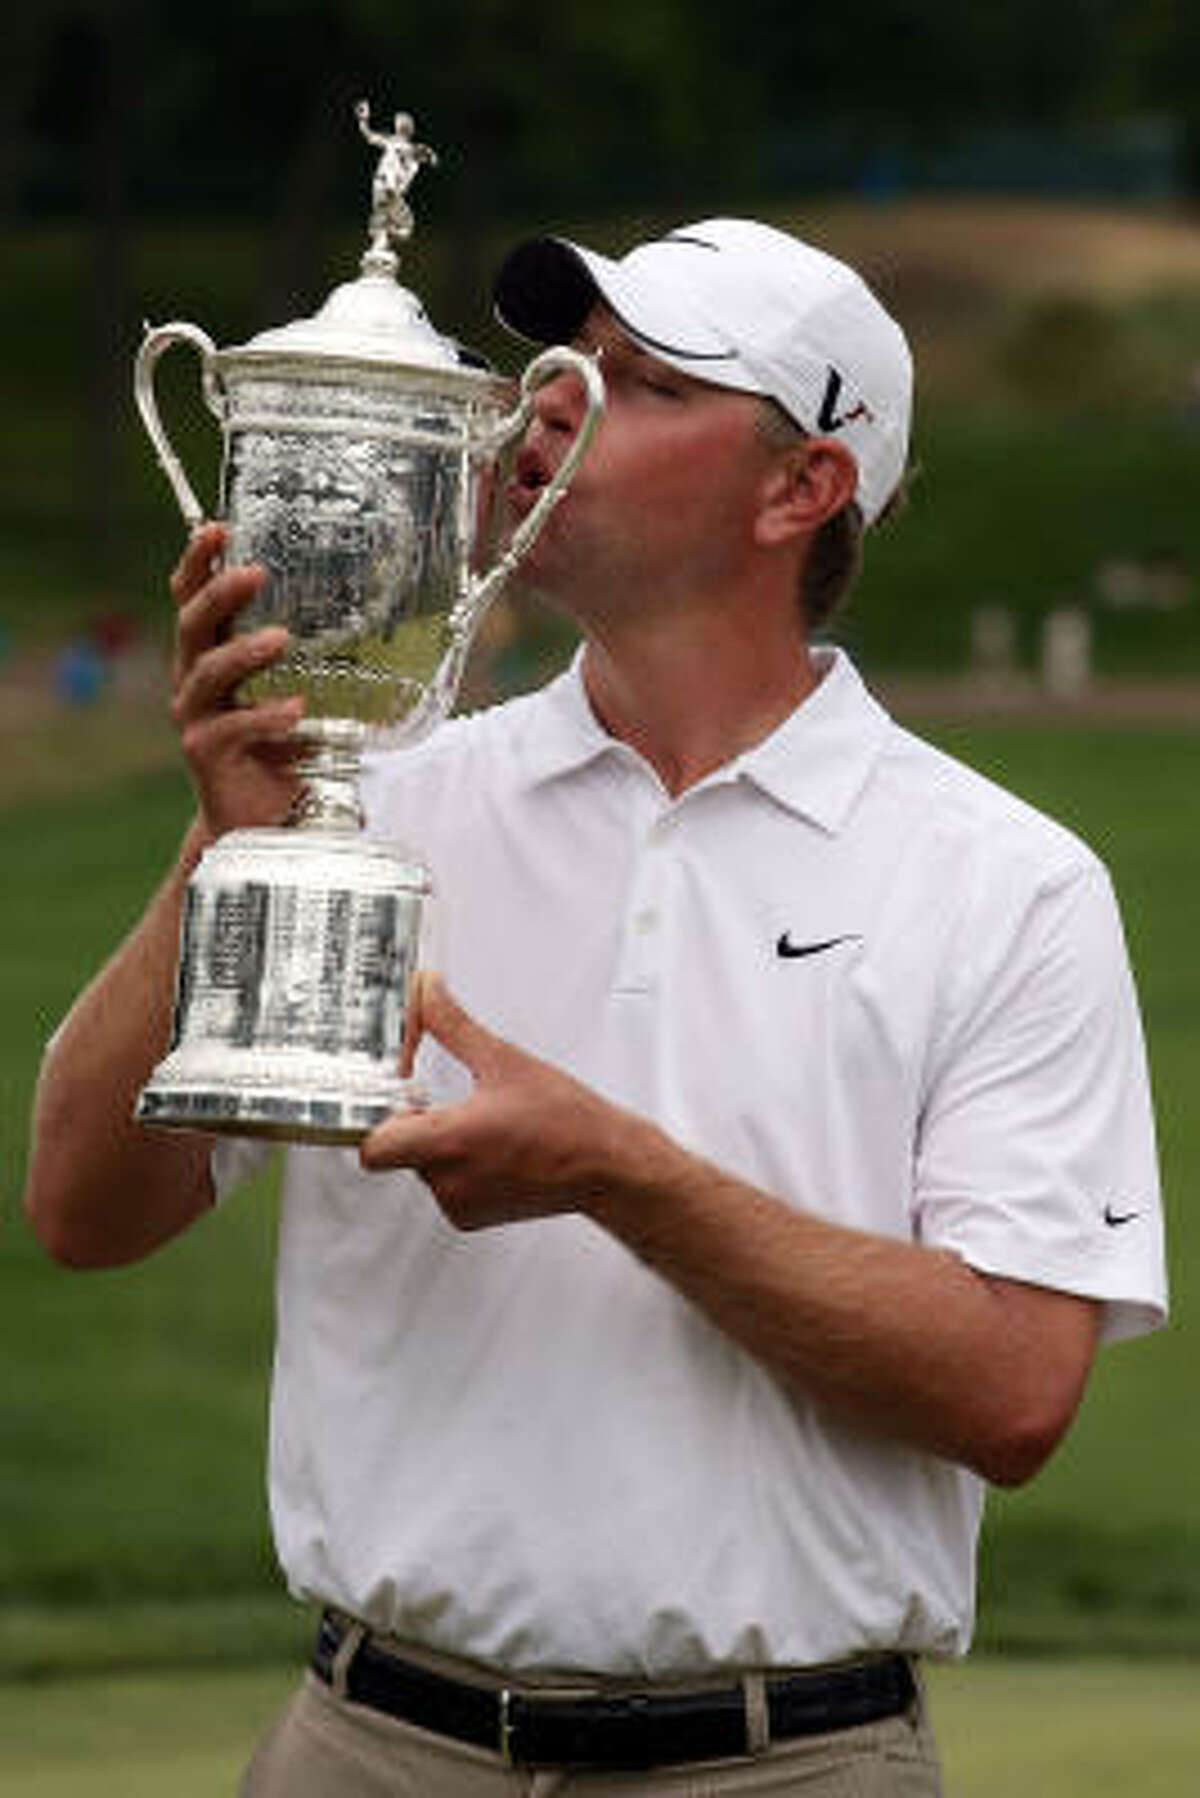 Lucas Glover celebrates with the winner's trophy after his two-stroke victory at the 109th U.S. Open.